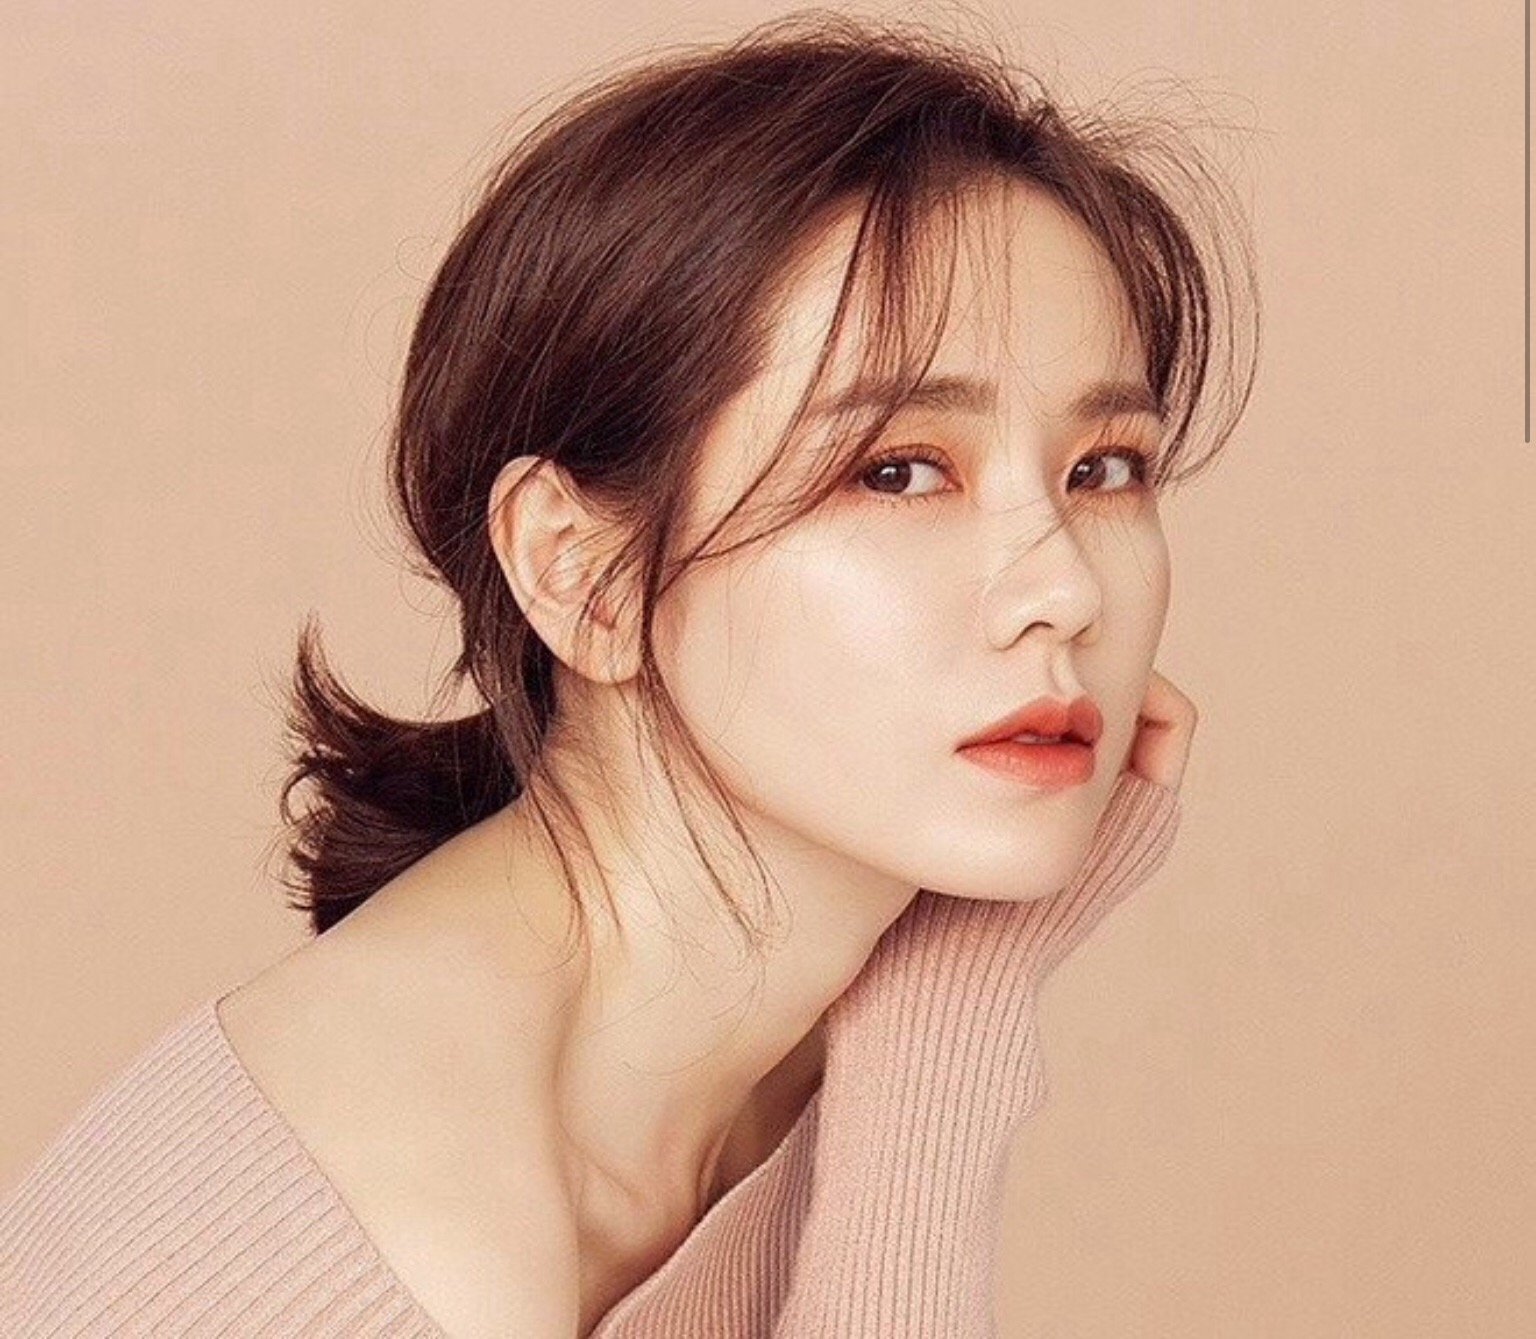 5-actresses-have-the-highest-priority-of-casting-in-2020-son-ye-jin